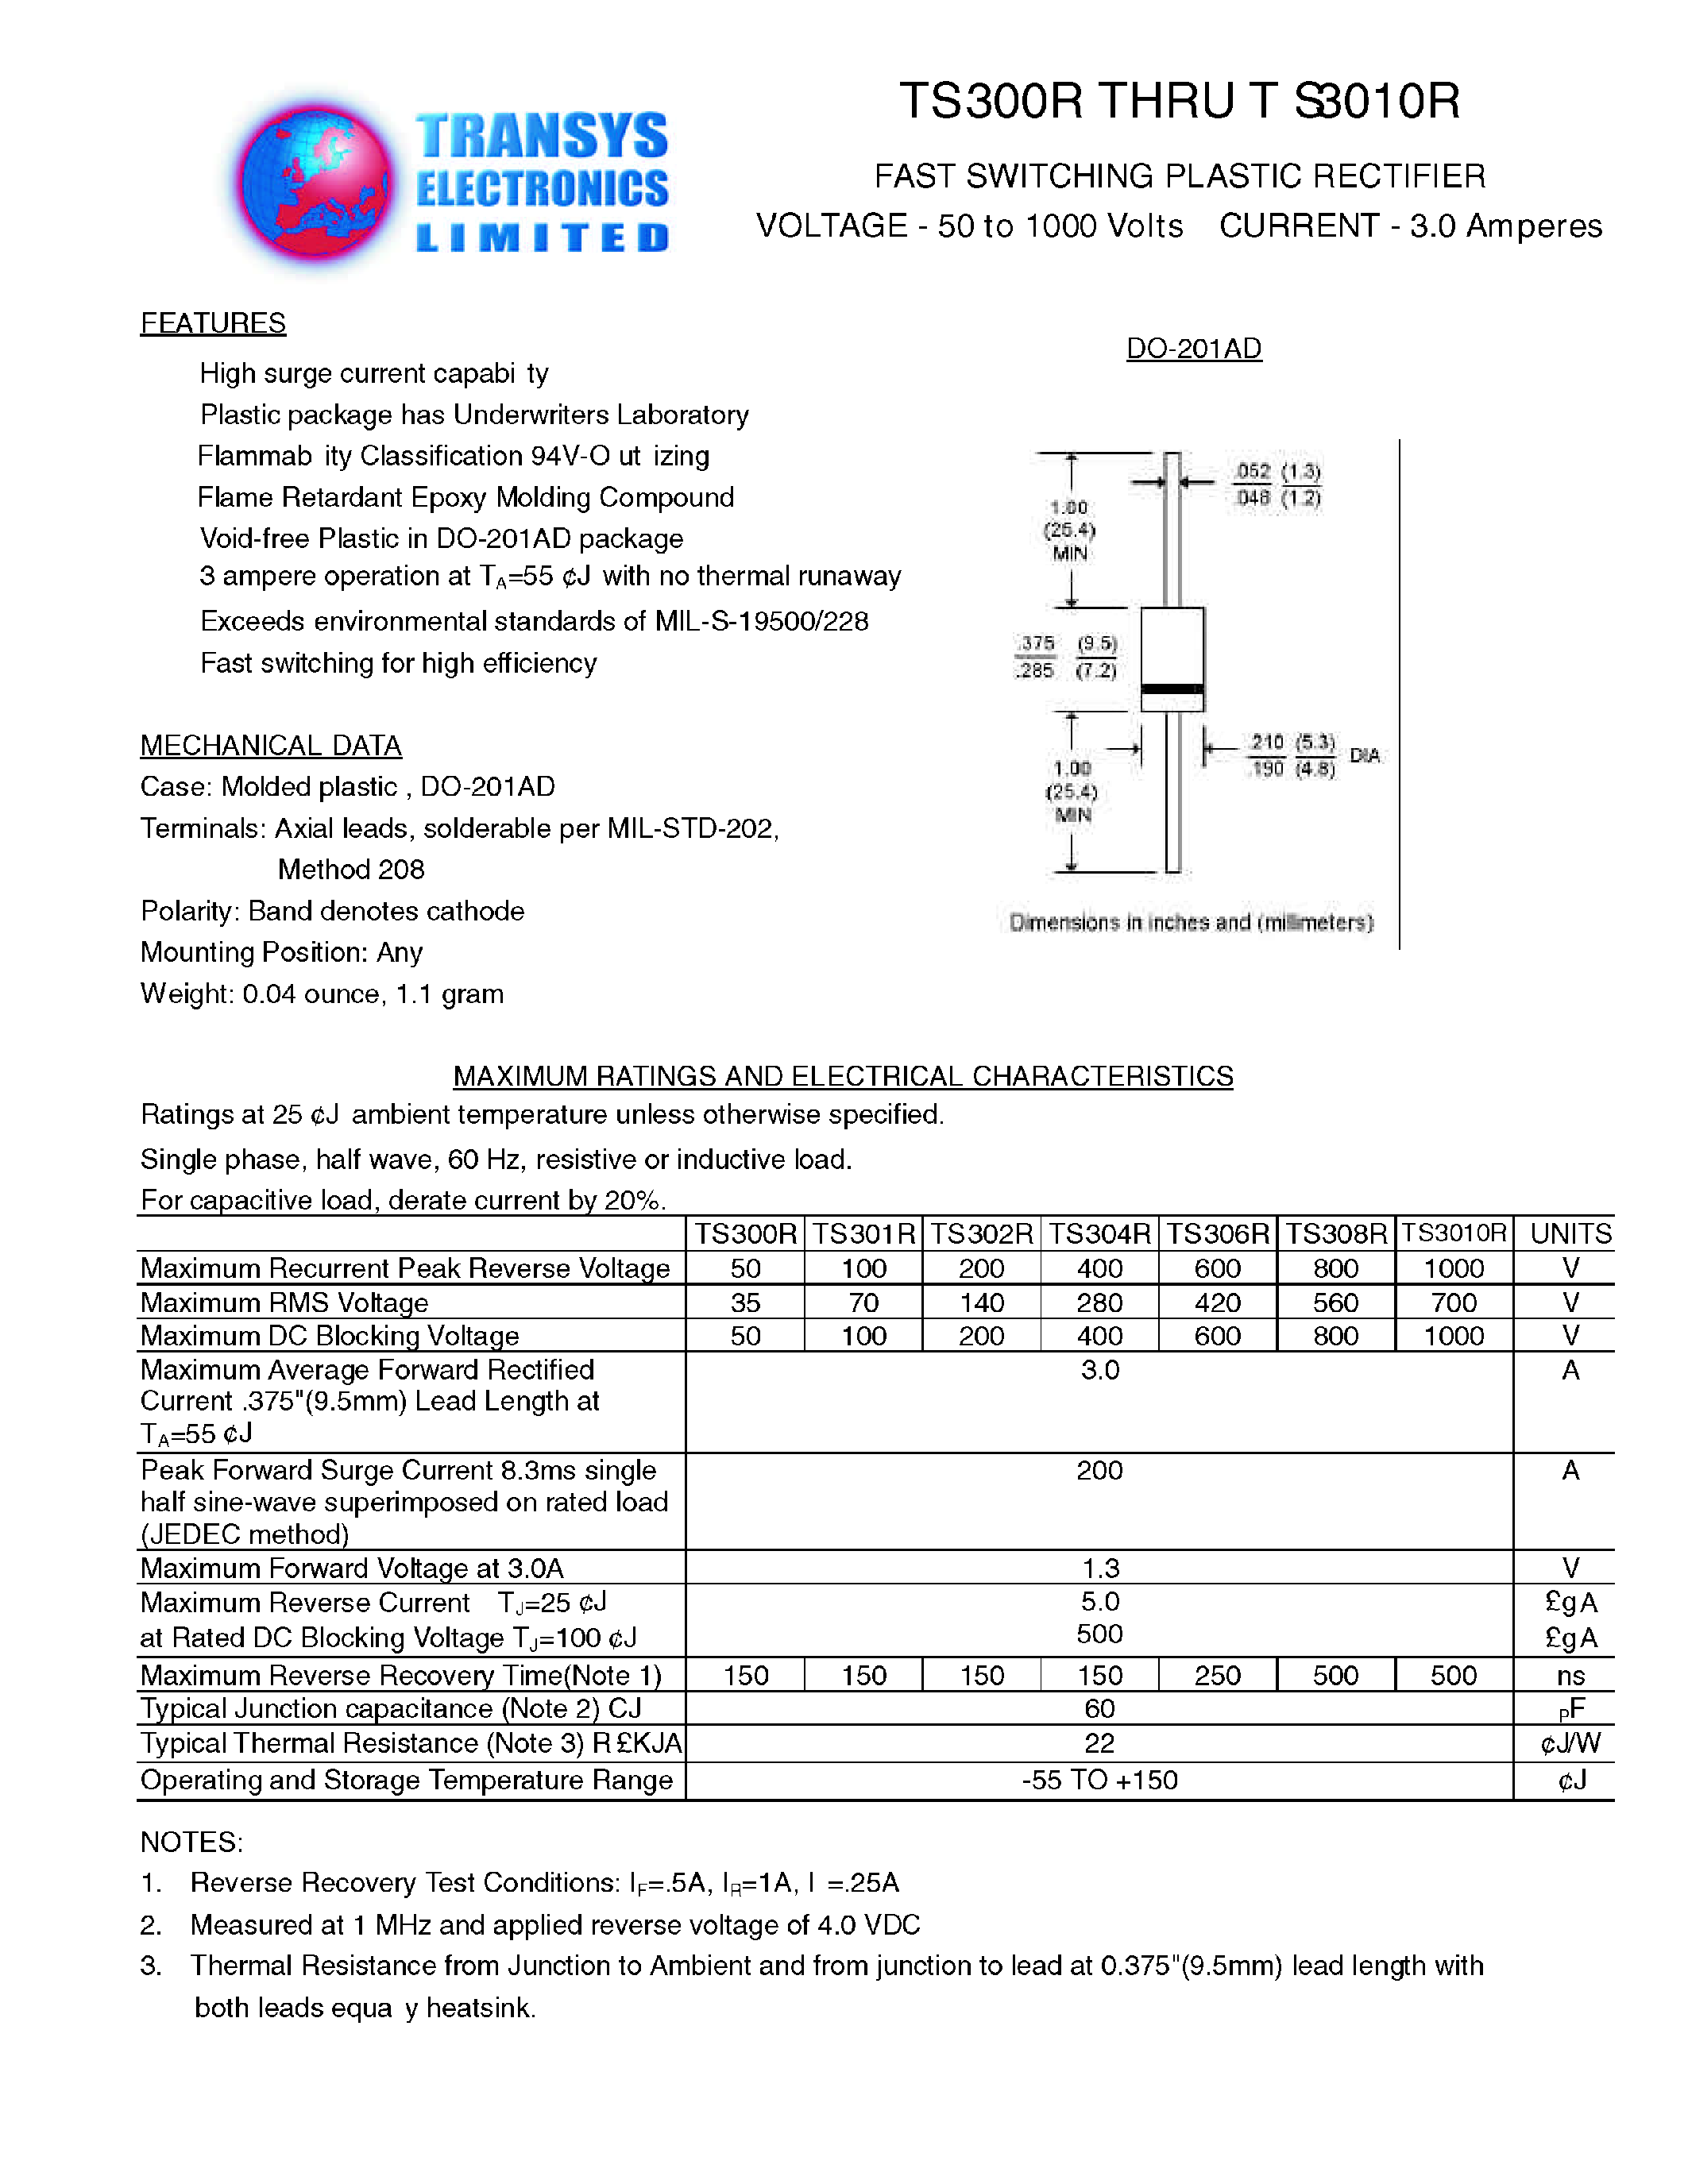 Datasheet TS300R - FAST SWITCHING PLASTIC RECTIFIER page 1